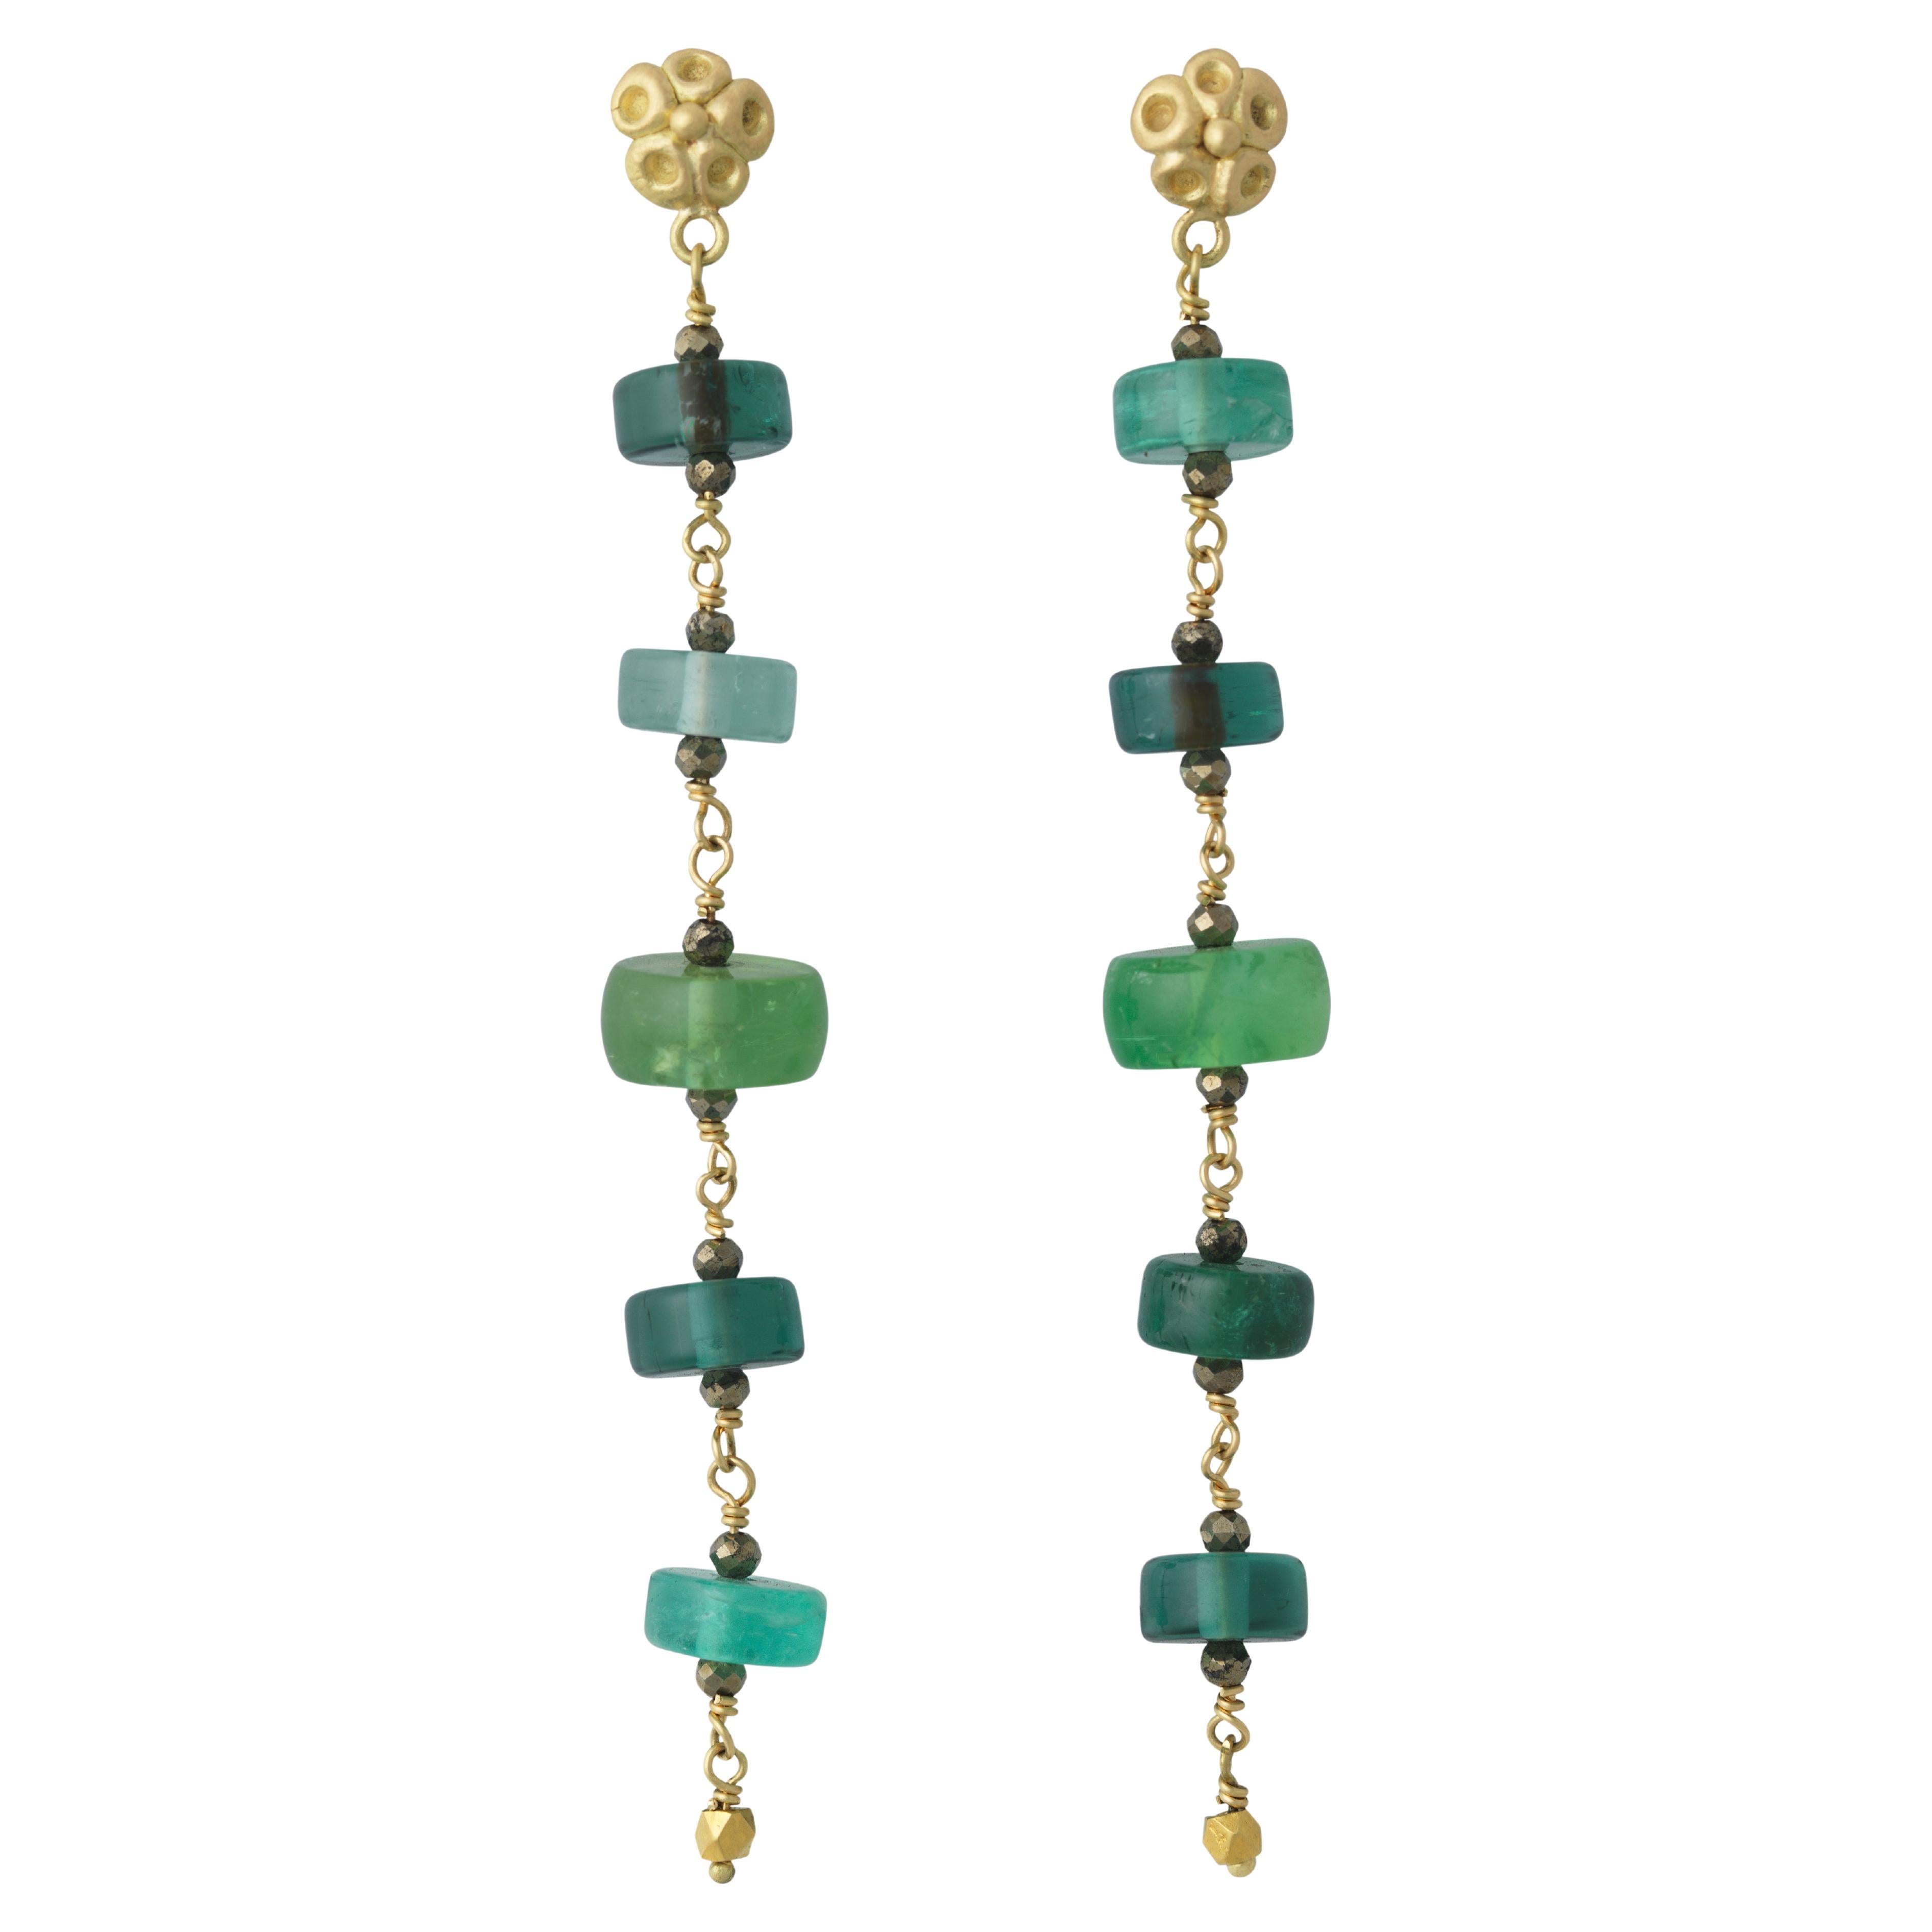 18k Gold Drop Earrings with Green Tourmaline Disk Beads For Sale